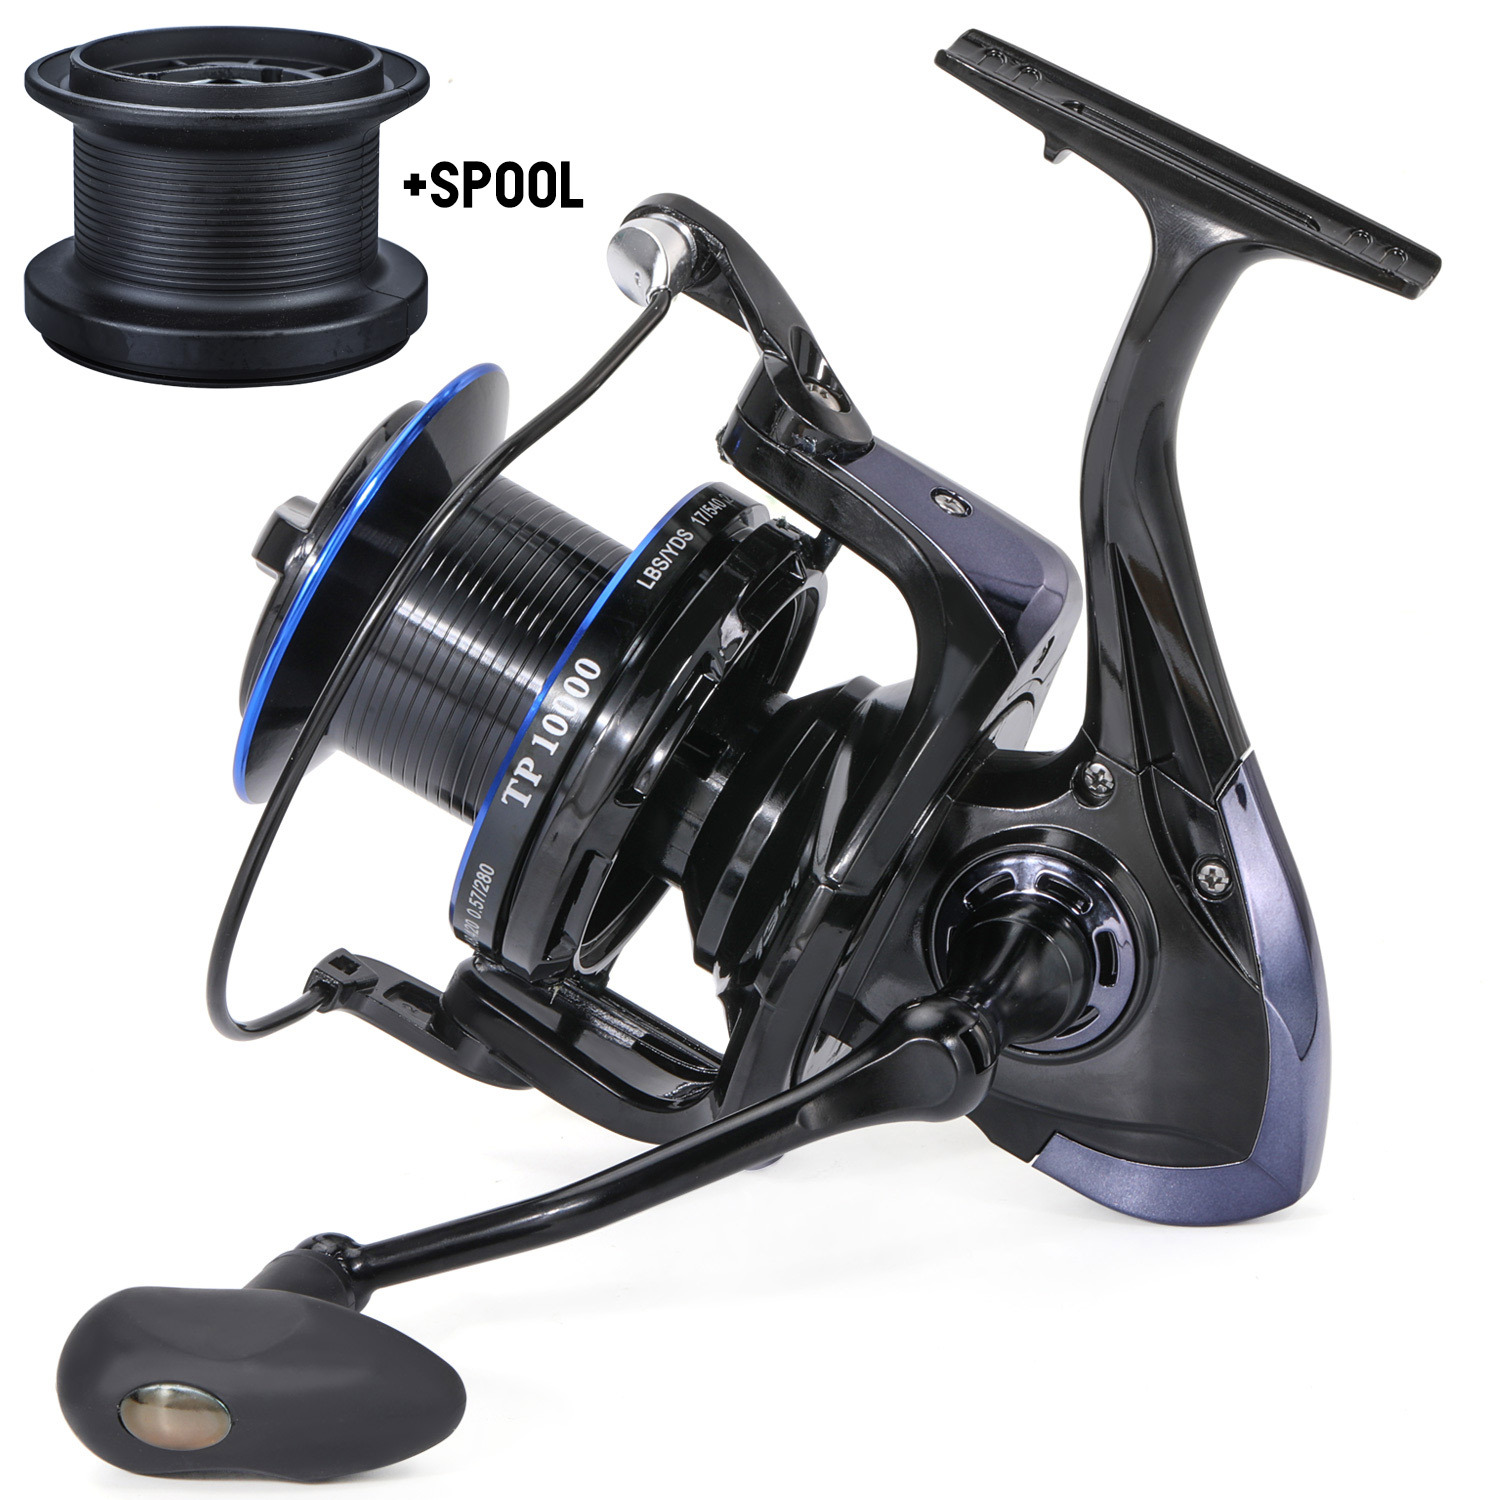 Gl1000-7000 Fishing Reel 13bb Ball Bearing 5.5:1 Gear Ratio Fishing Tackle  Suitable For Seawater Freshwater